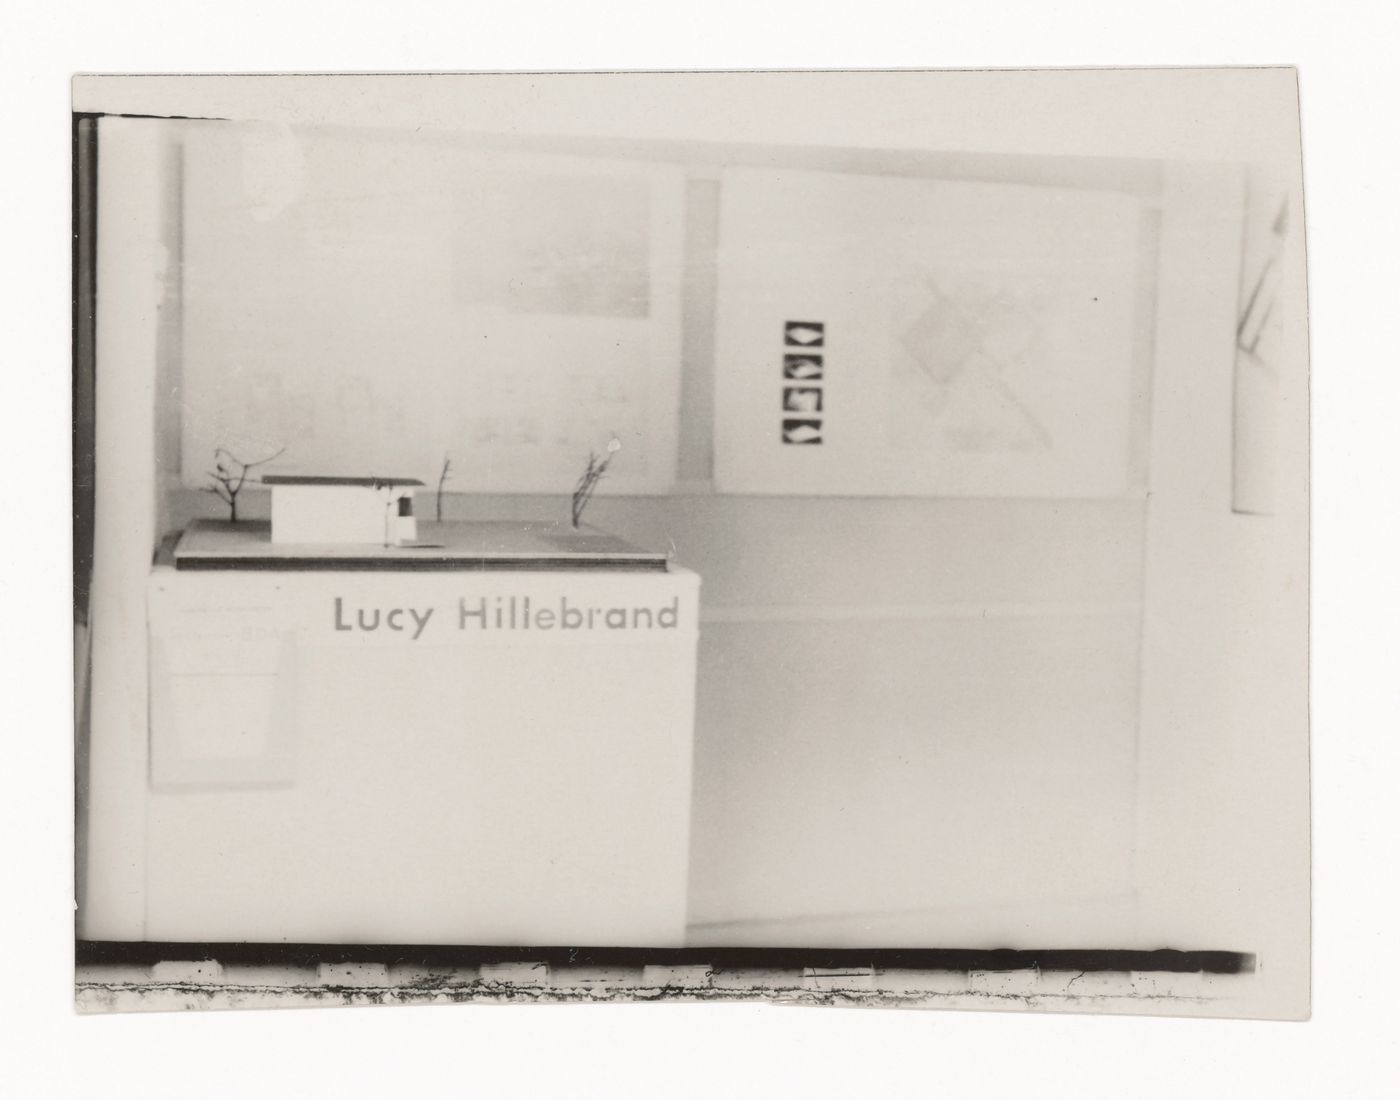 View of small-scale model and plans of unidentified house by Lucy Hillebrand